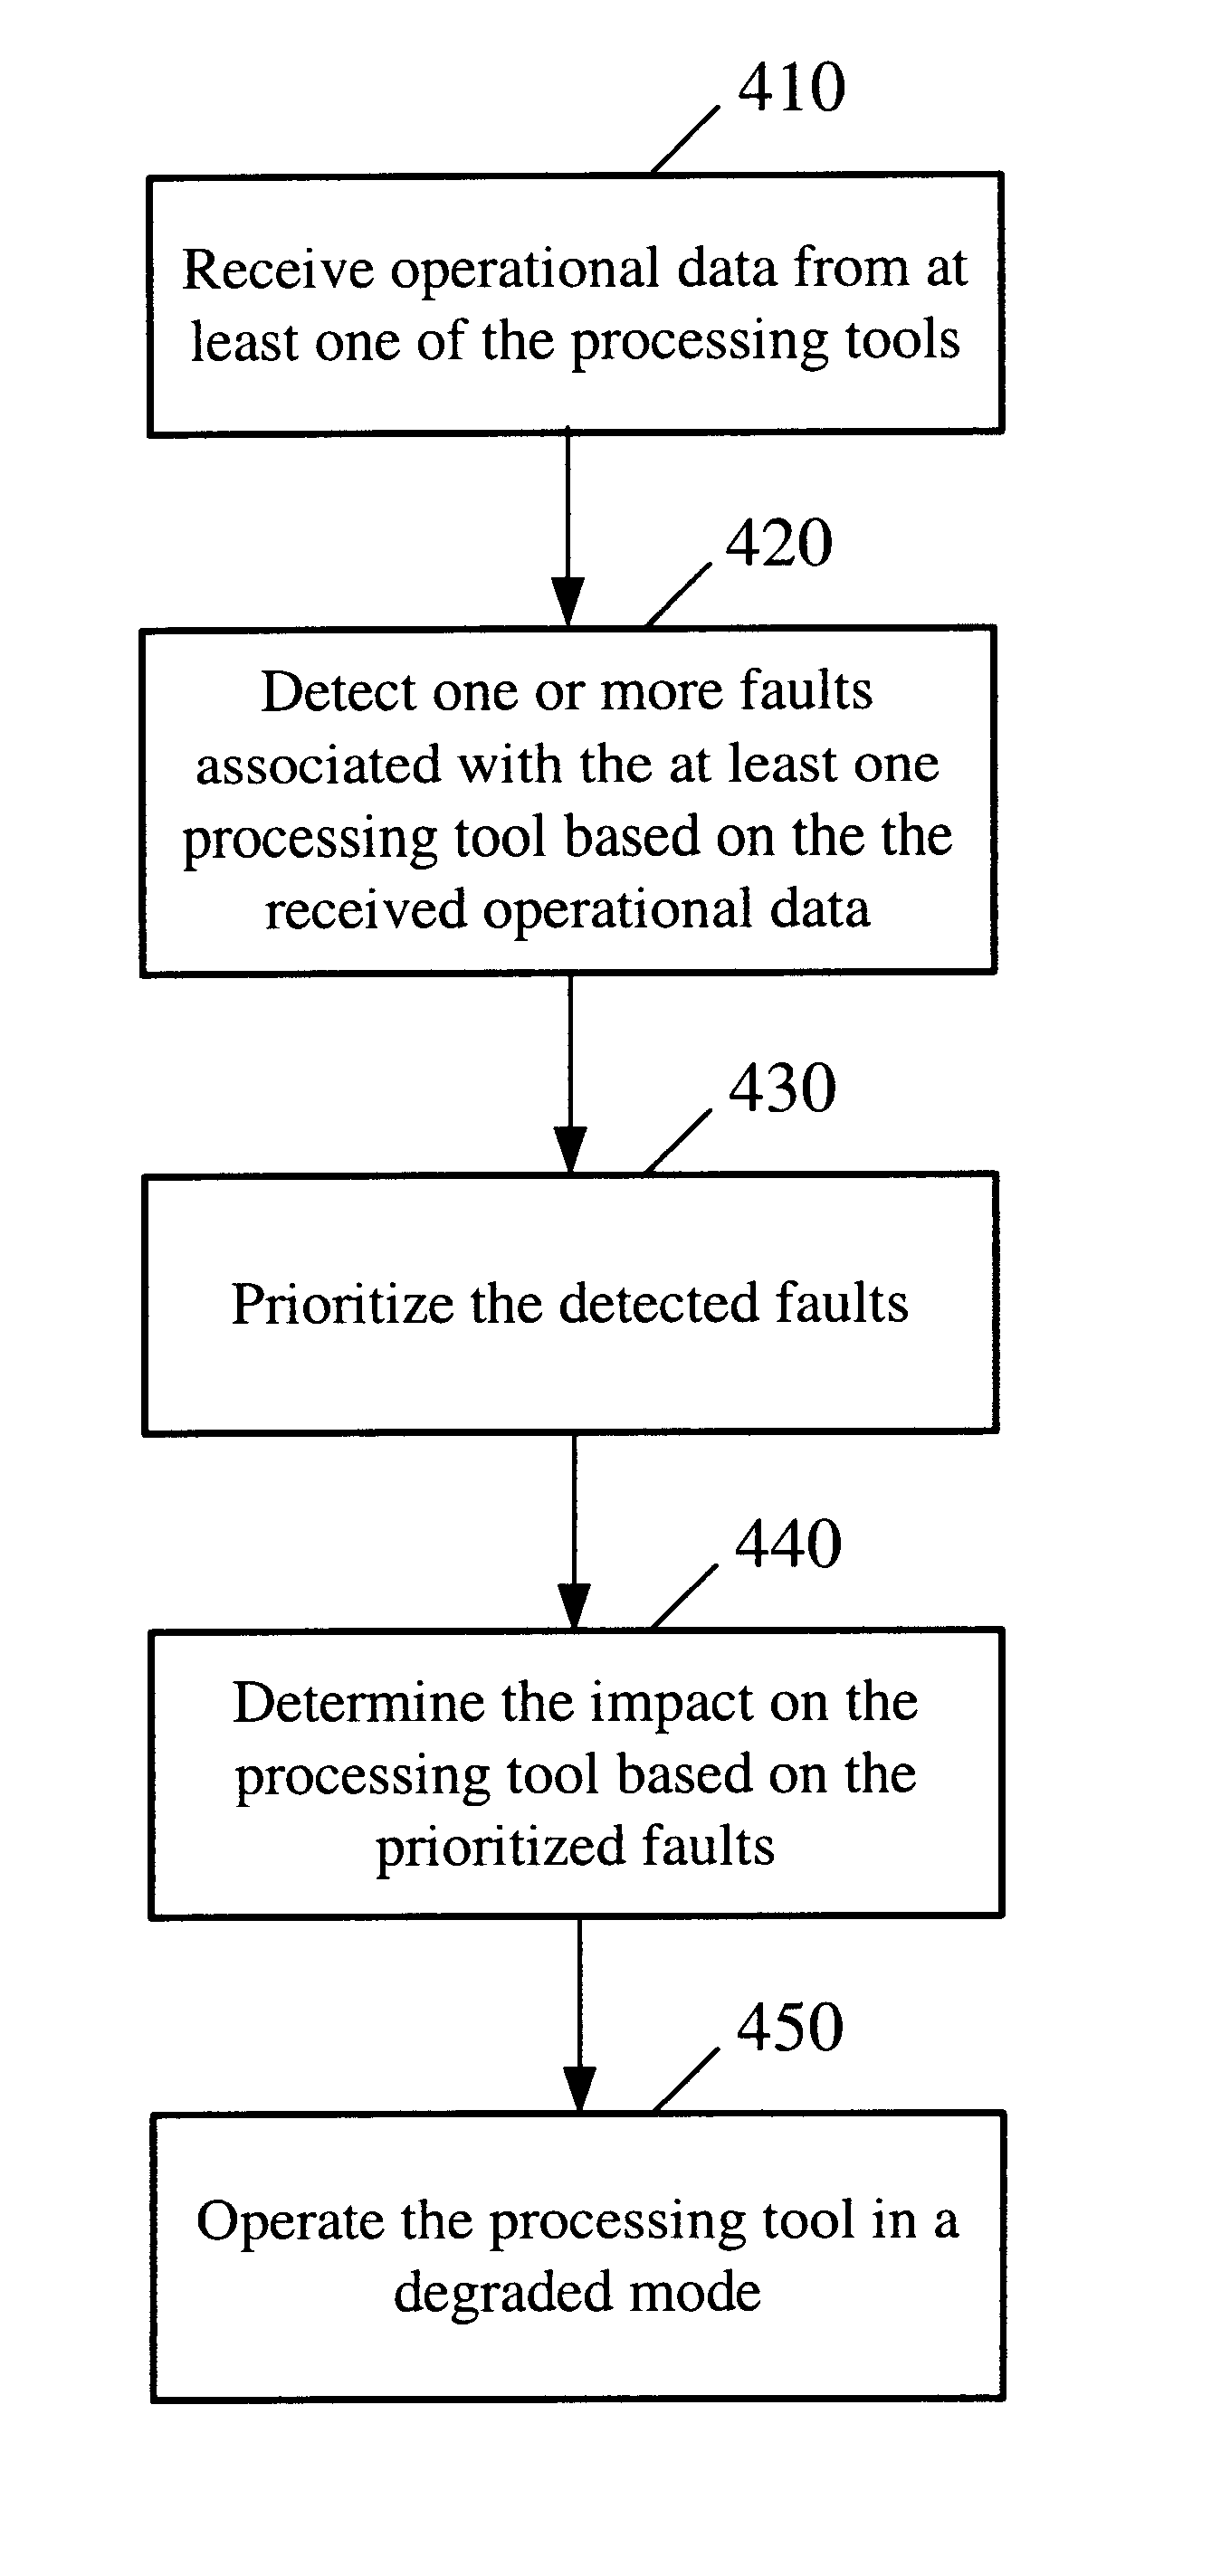 Operating a processing tool in a degraded mode upon detecting a fault